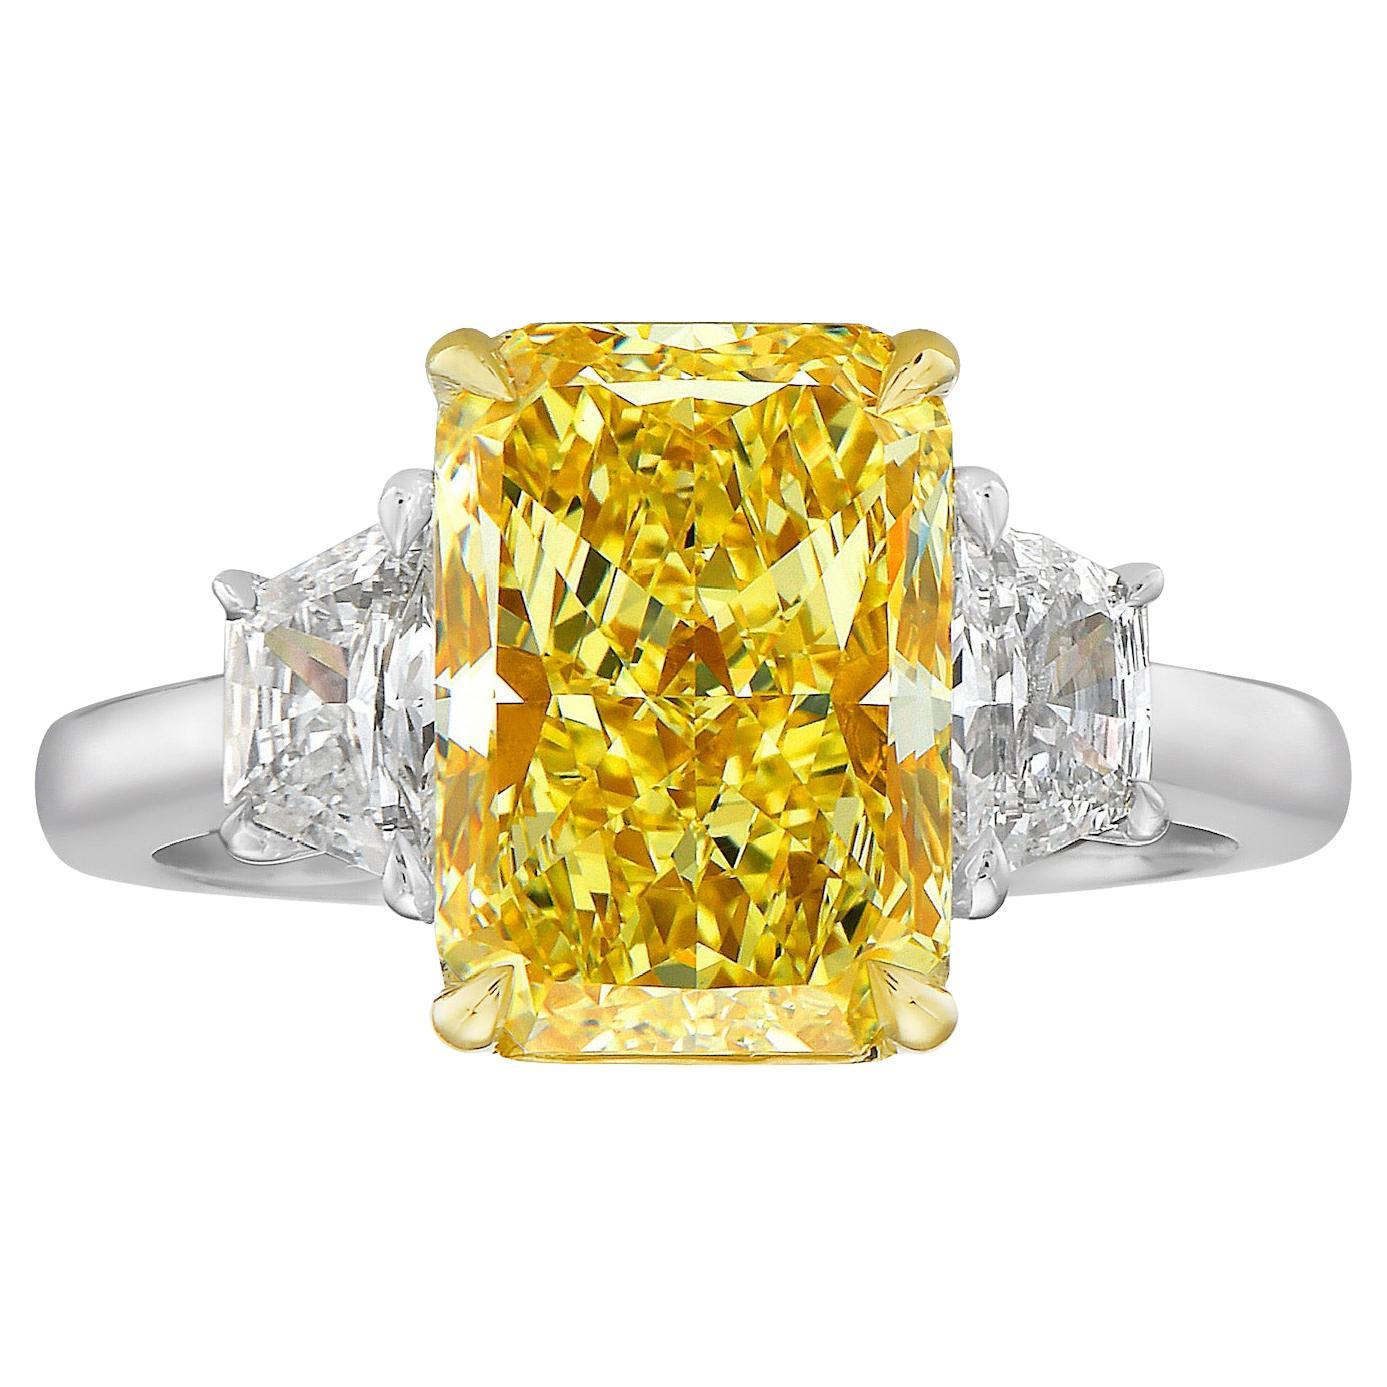 3 Carat GIA Flawless Fancy Light Yellow Elongated Radiant Diamond Ring For Sale